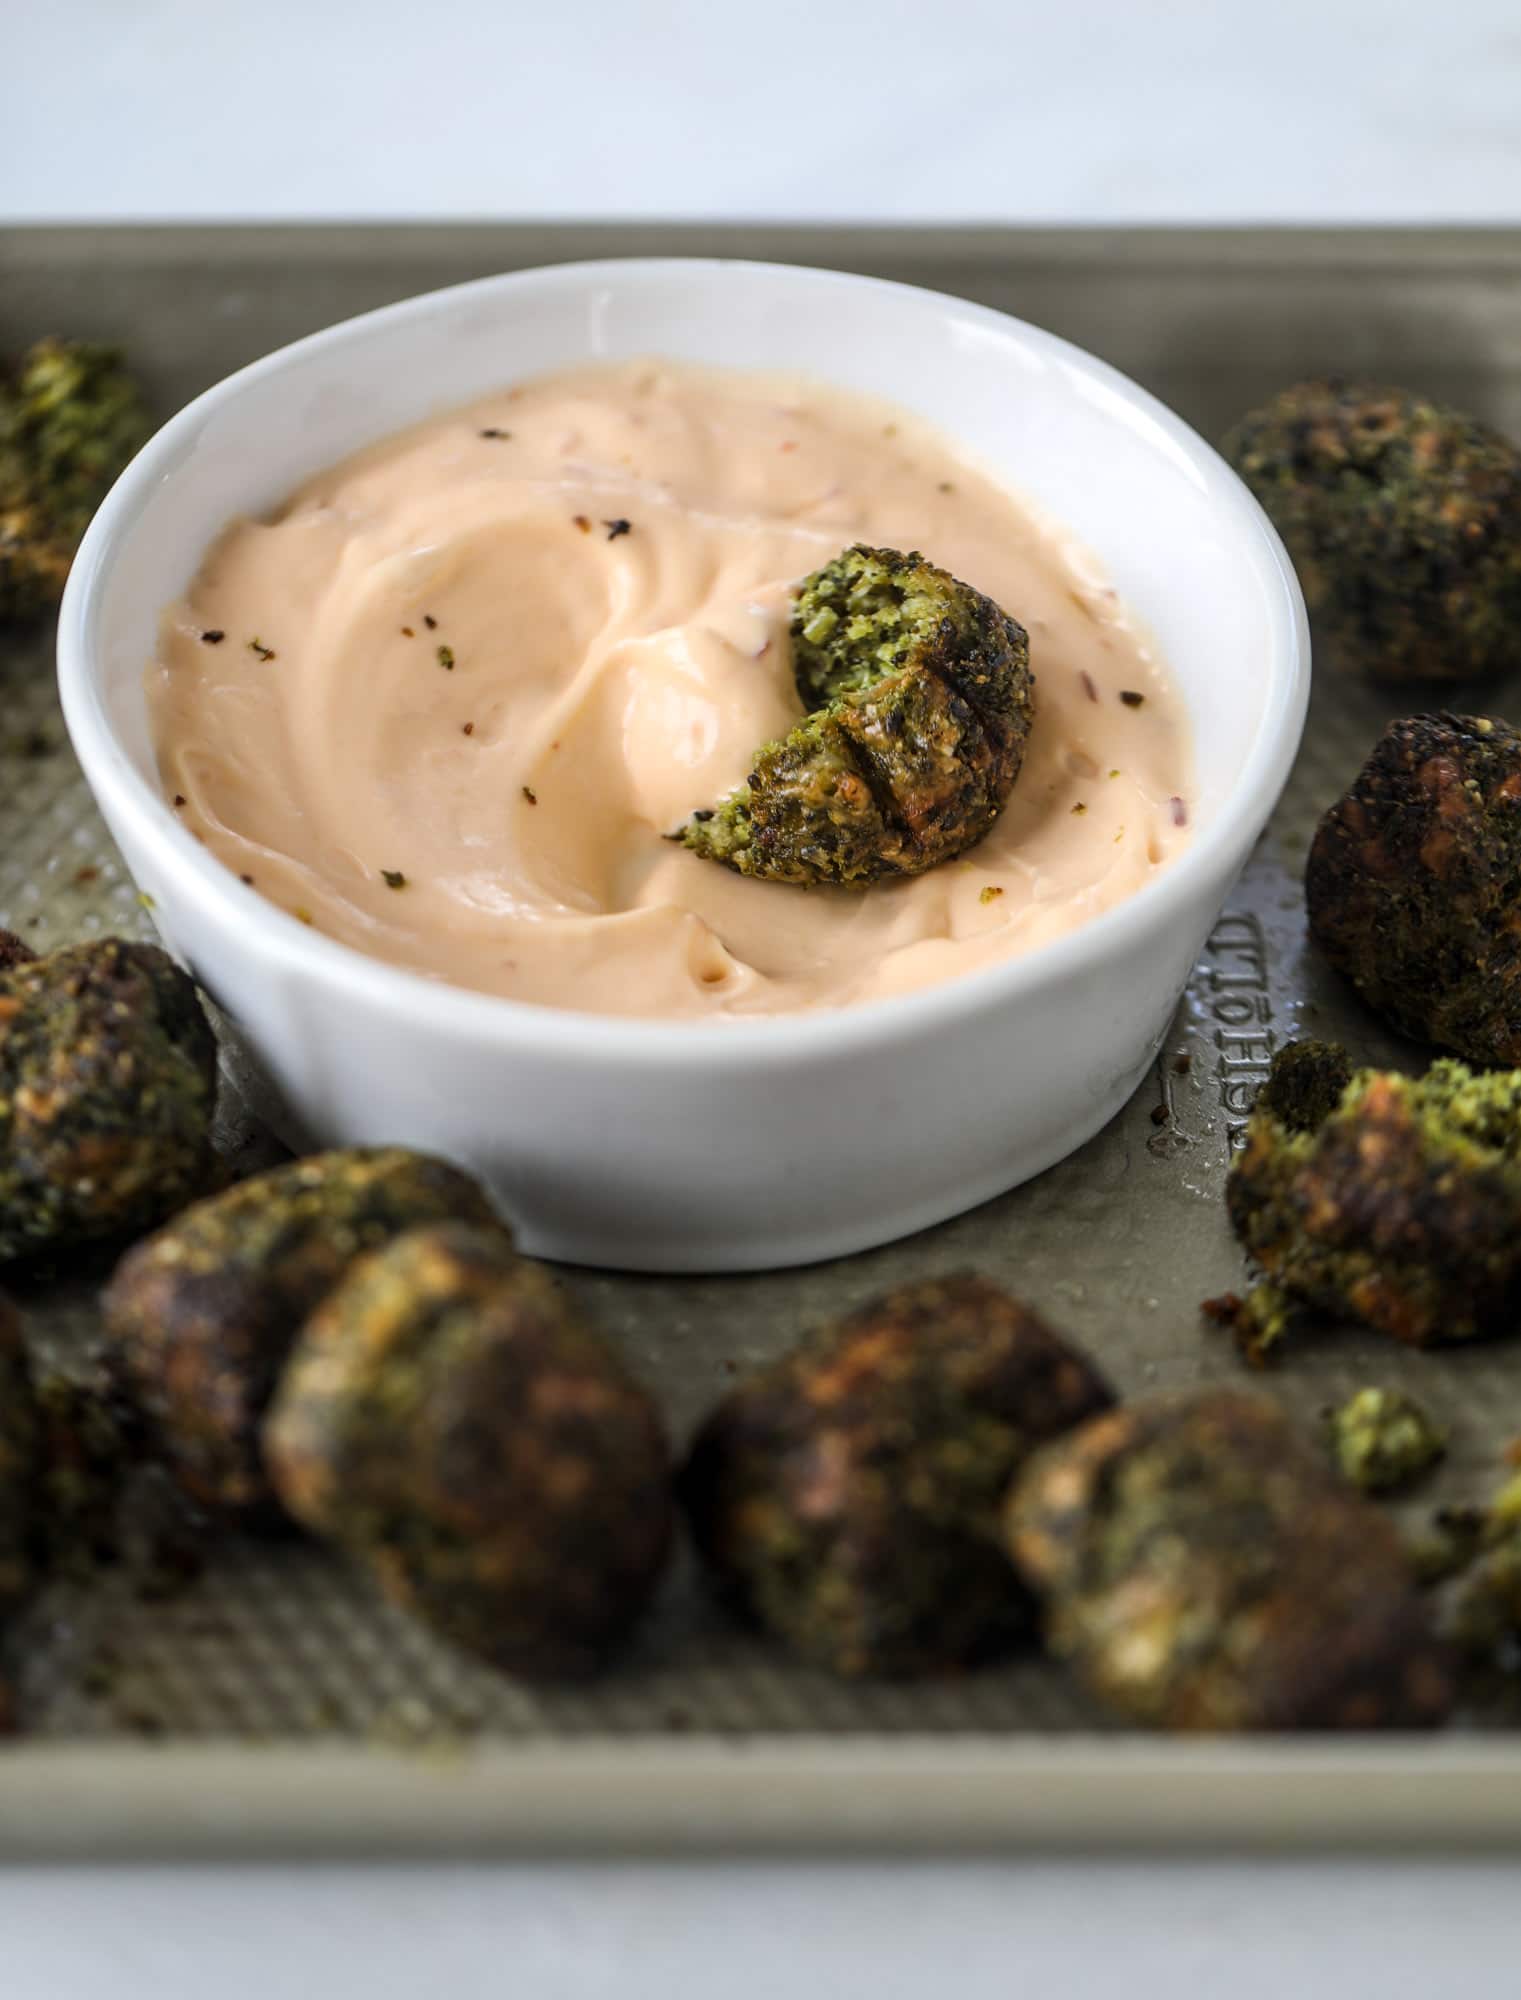 These broccoli cheddar tots are baked, crispy bites of broccoli and sharp cheddar cheese! So delicious and easy to throw together too. I howsweeteats.com #broccolicheddar #tots